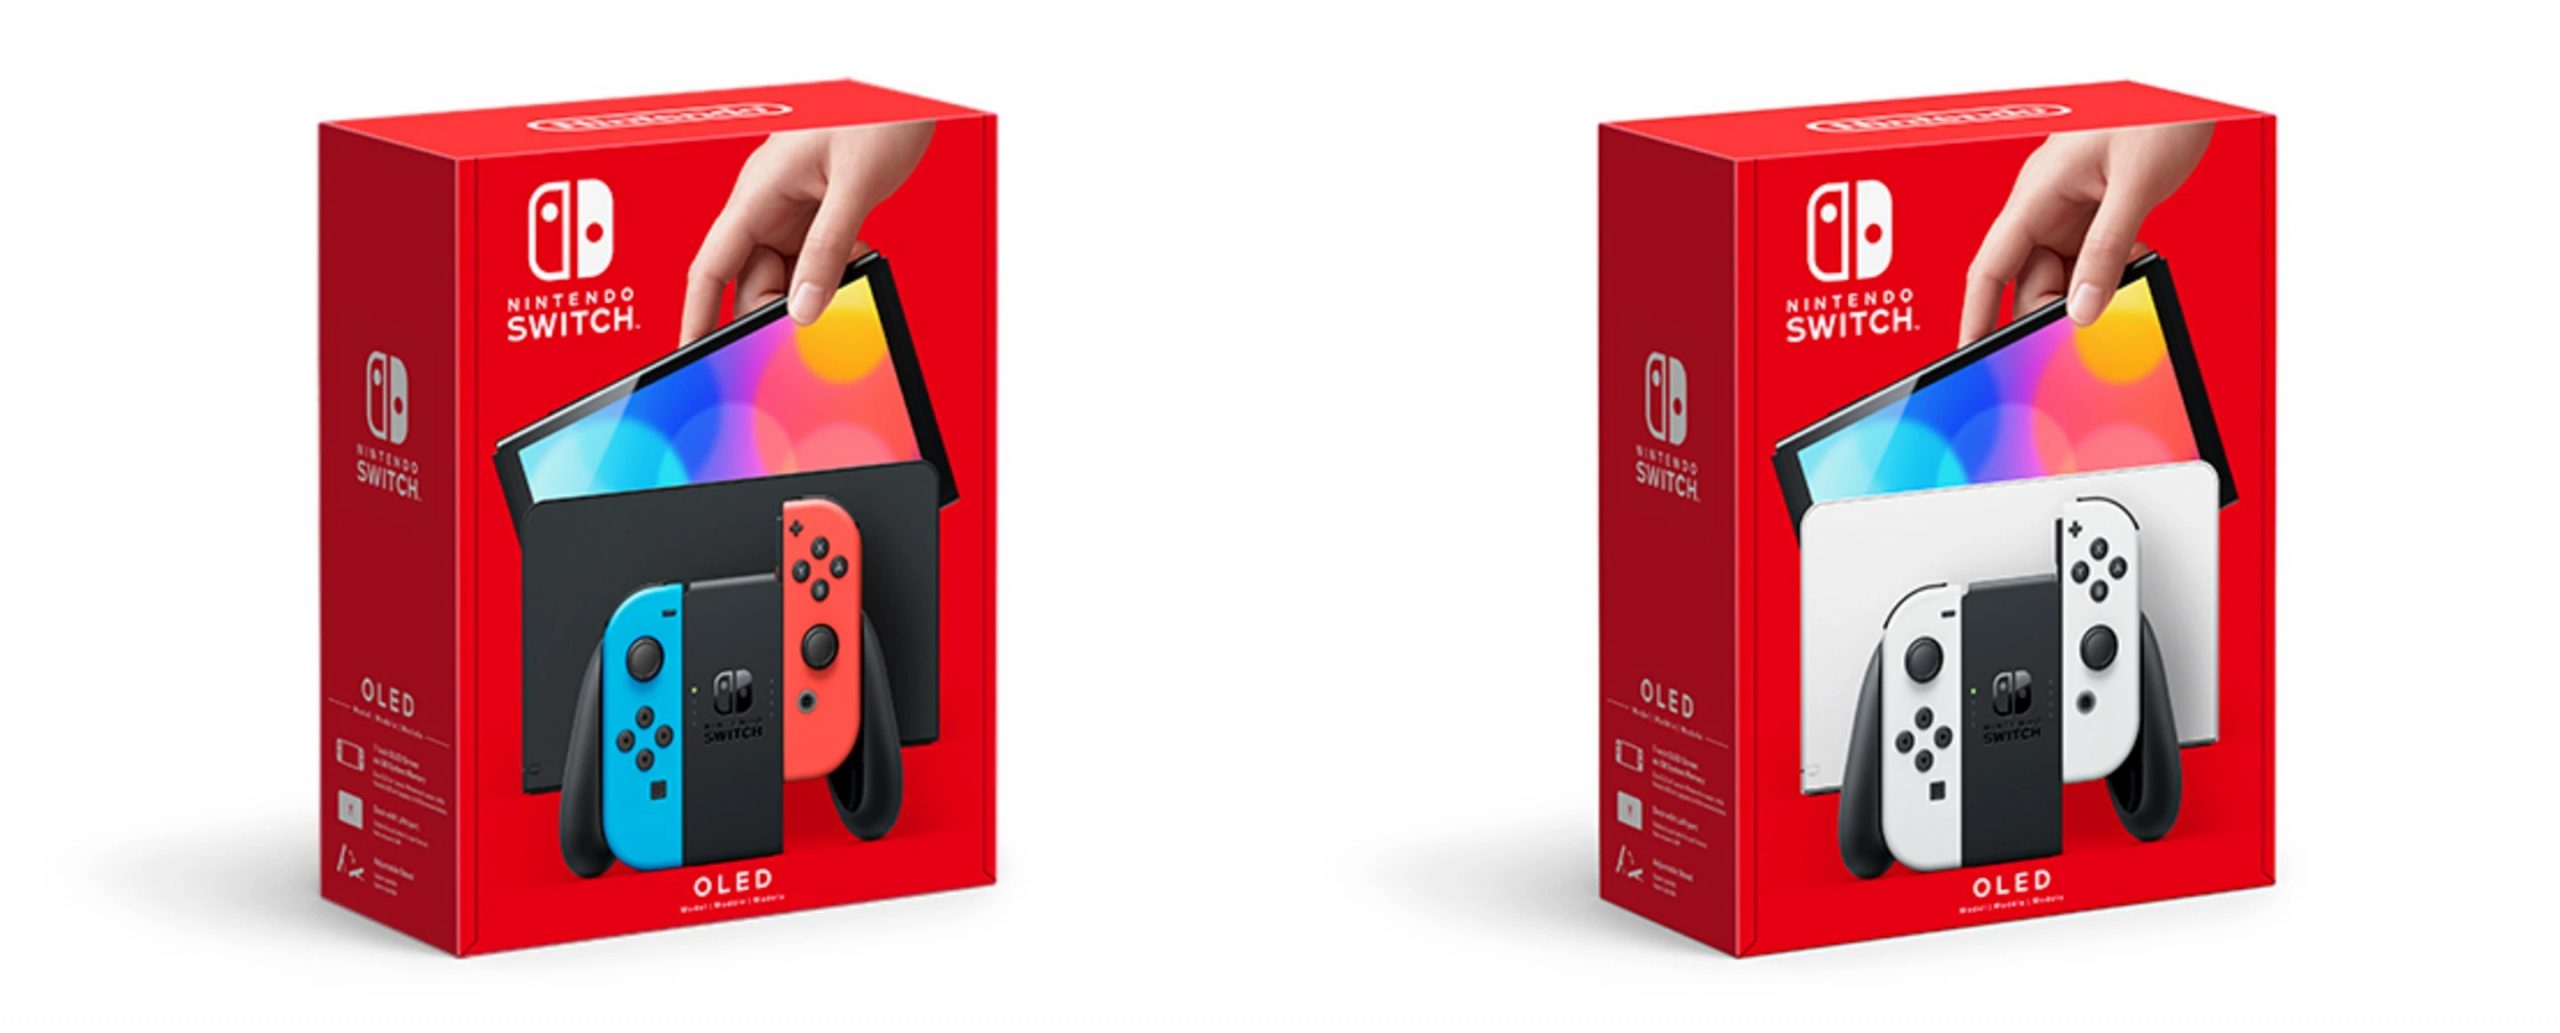 Switch OLED packaging, official announcement details